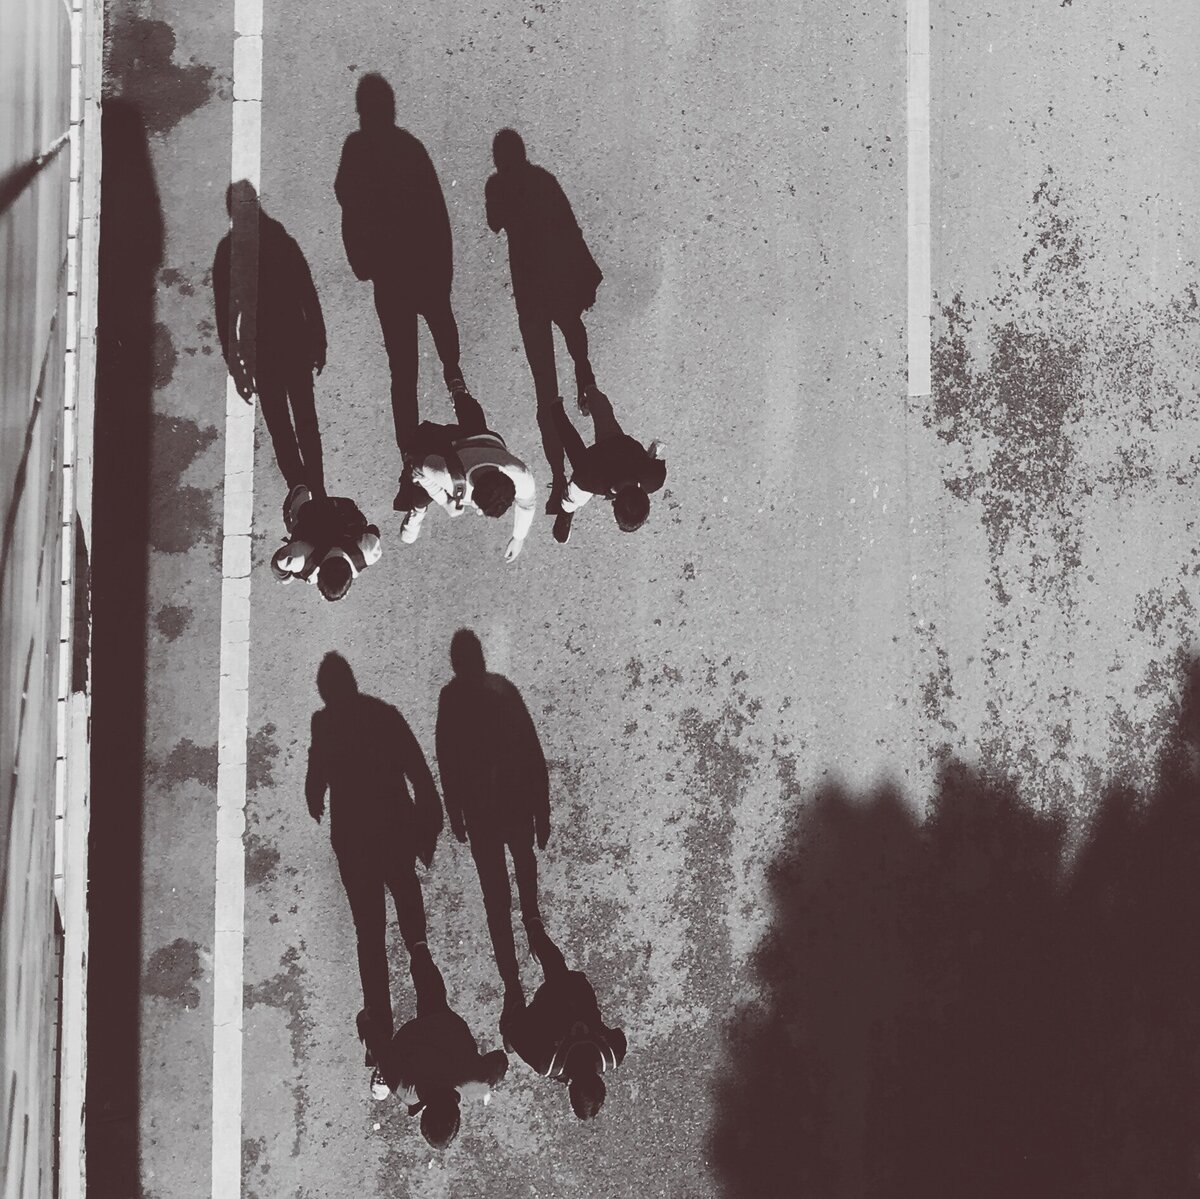 Black and white bird's-eye-view of five people walking down street with their shadows extending behind.